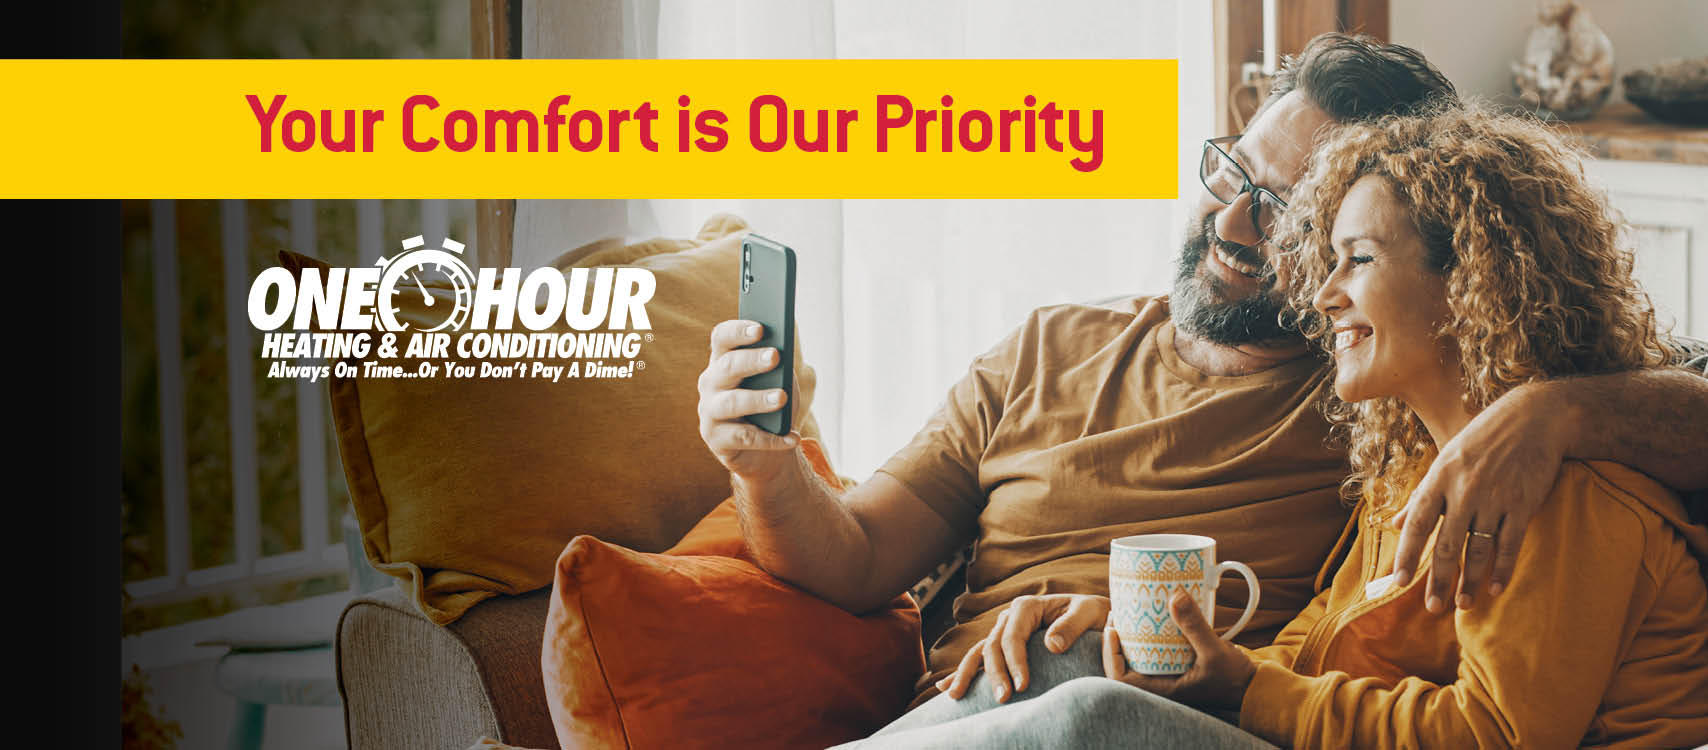 Couple sitting on a couch looking at a phone, drinking coffee, & smiling with the overlay text that says Your Comfort is Our Priority with the One Hour logo | One Hour Heating & Air Conditioning |  Proudly serving  Cedar Park, Leander, Liberty Hill, & Lago Vista, TX and surrounding areas